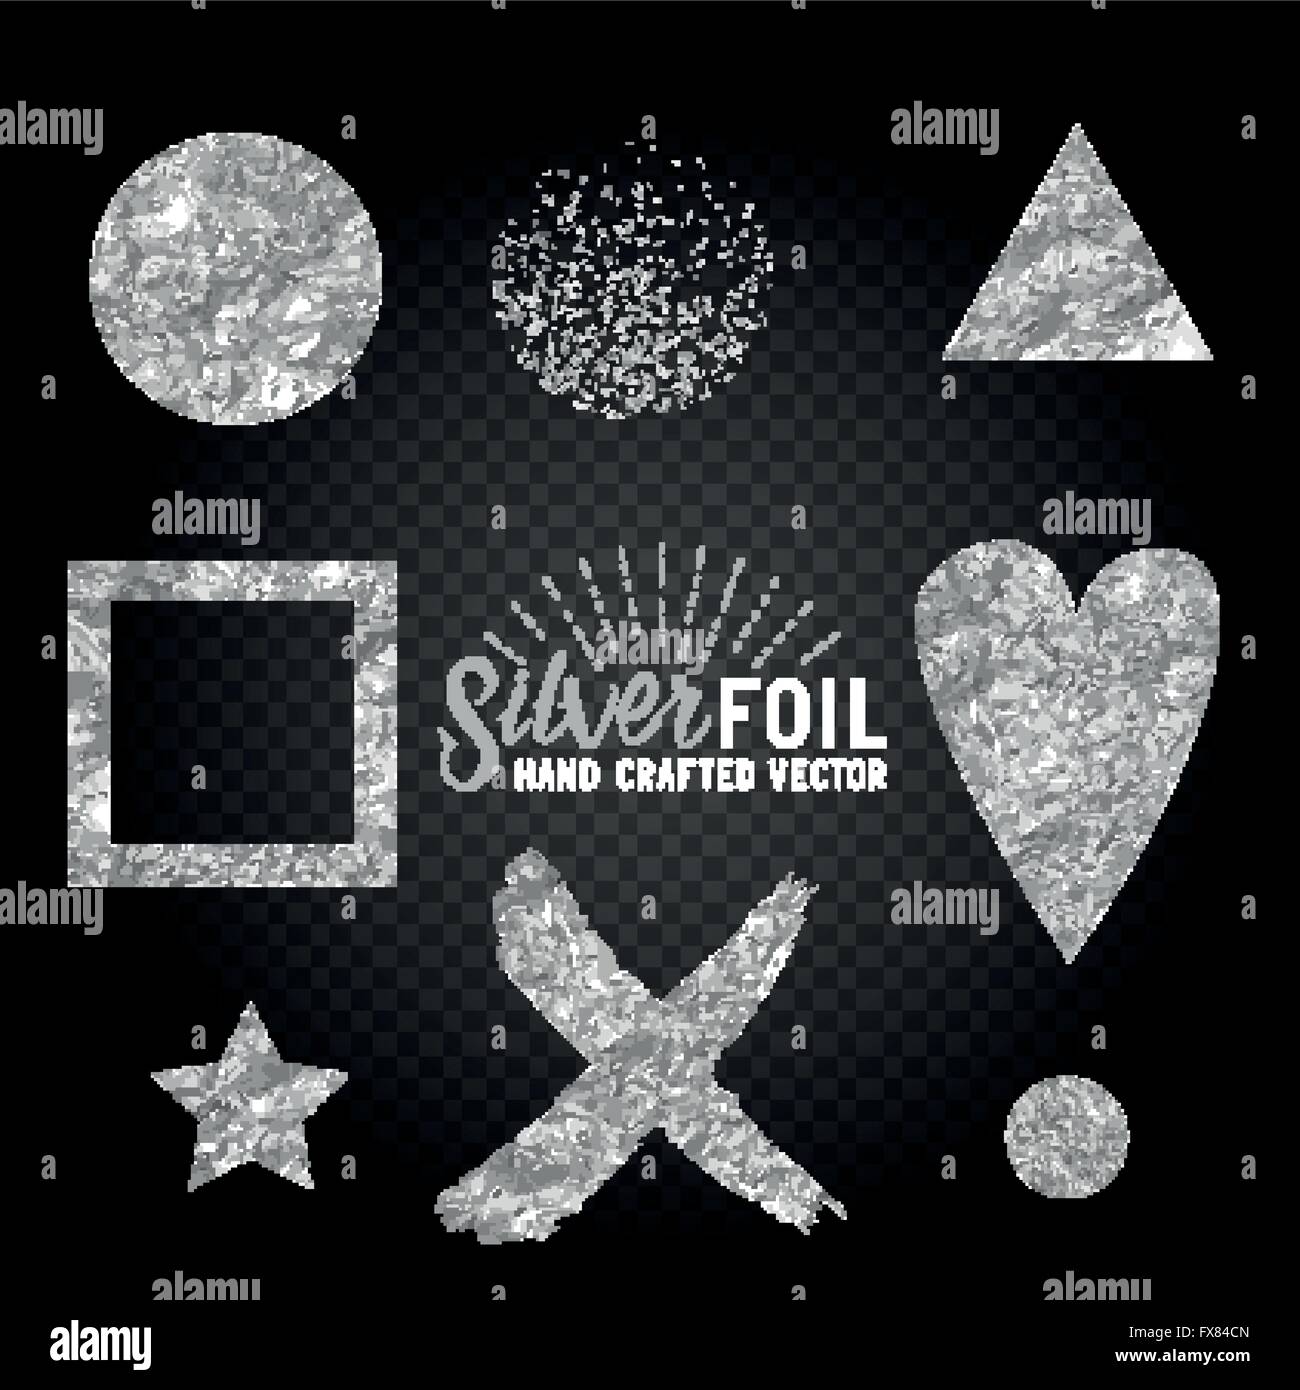 Vector Silver Foil Collection. A set of vector silver foil elements for backgrounds. Vector illustration. Stock Vector